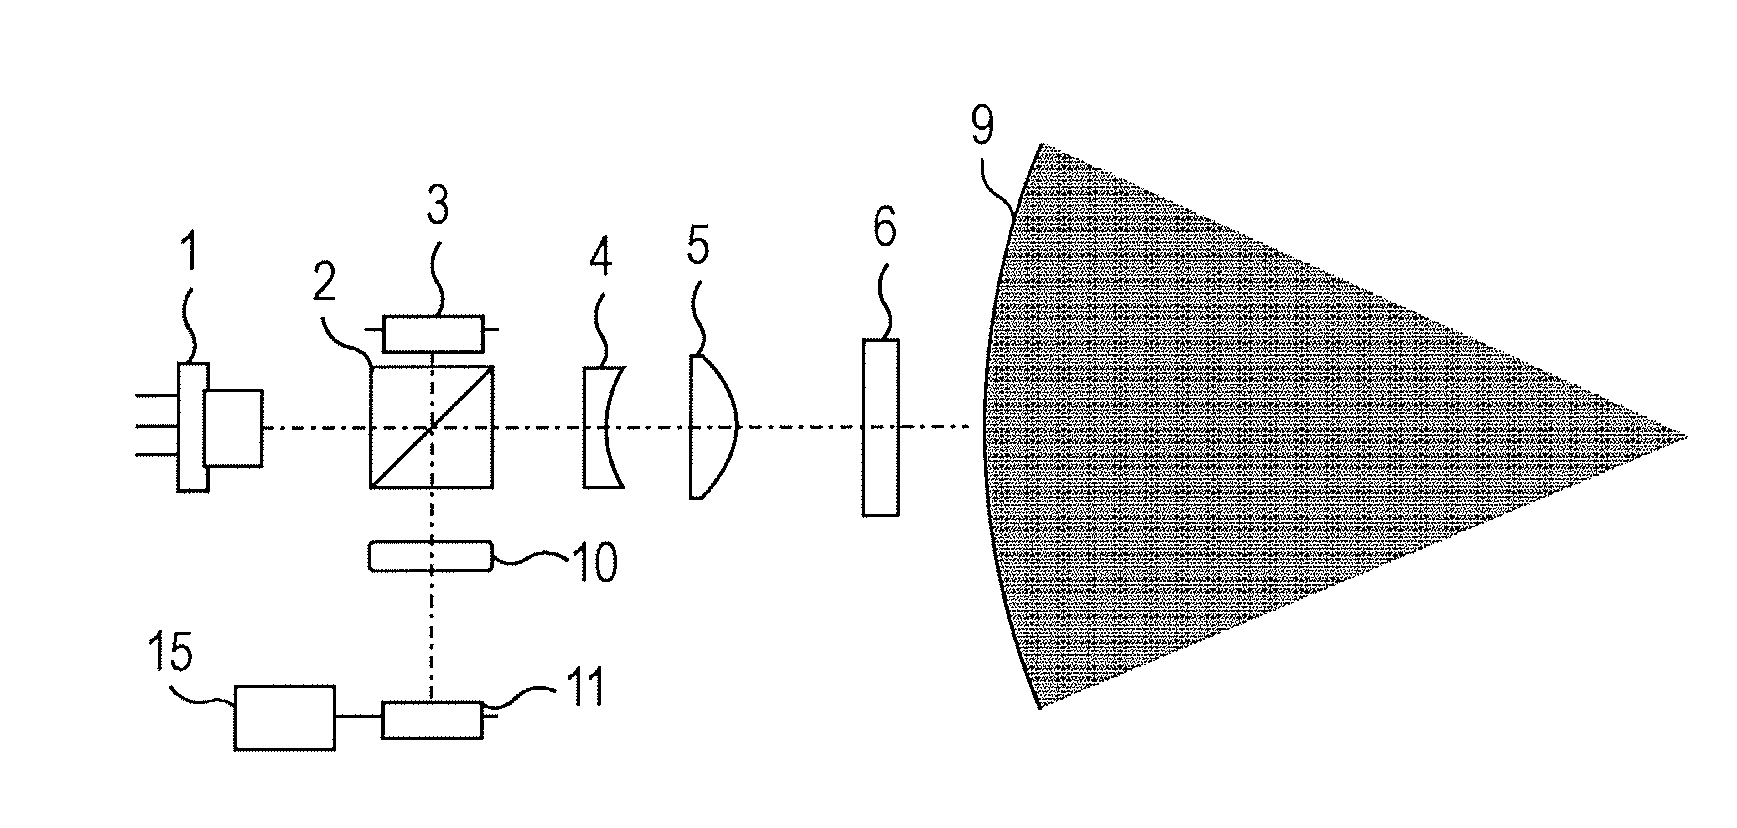 Apparatus for optically recording and reproducing information